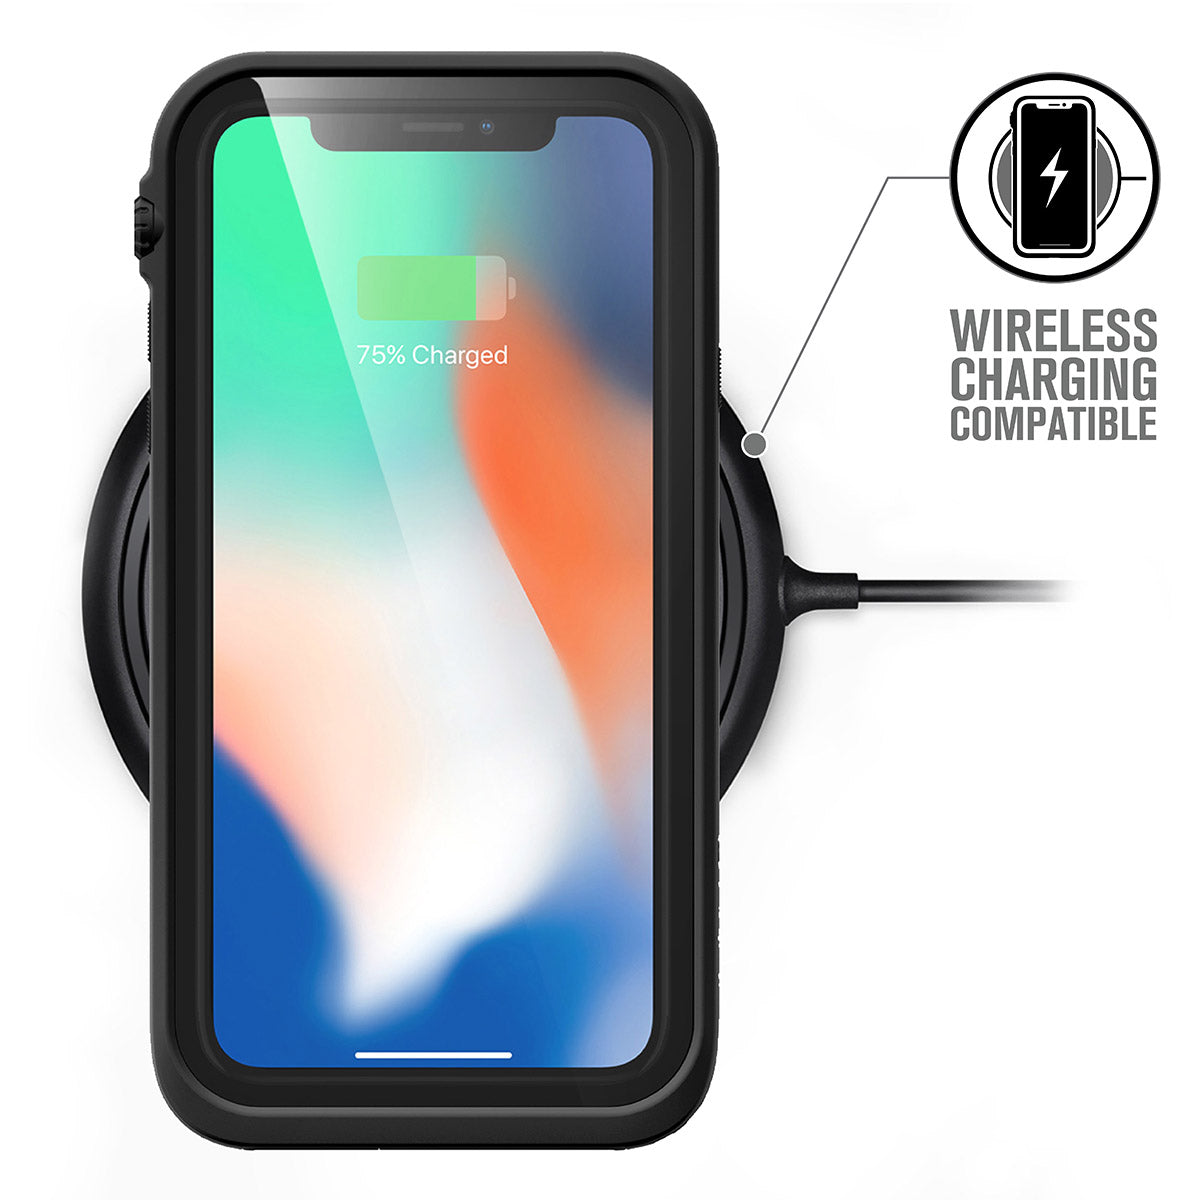 Catalyst iphone x/xr/xs/xs max waterproof case x showing wireless charging in stealth black